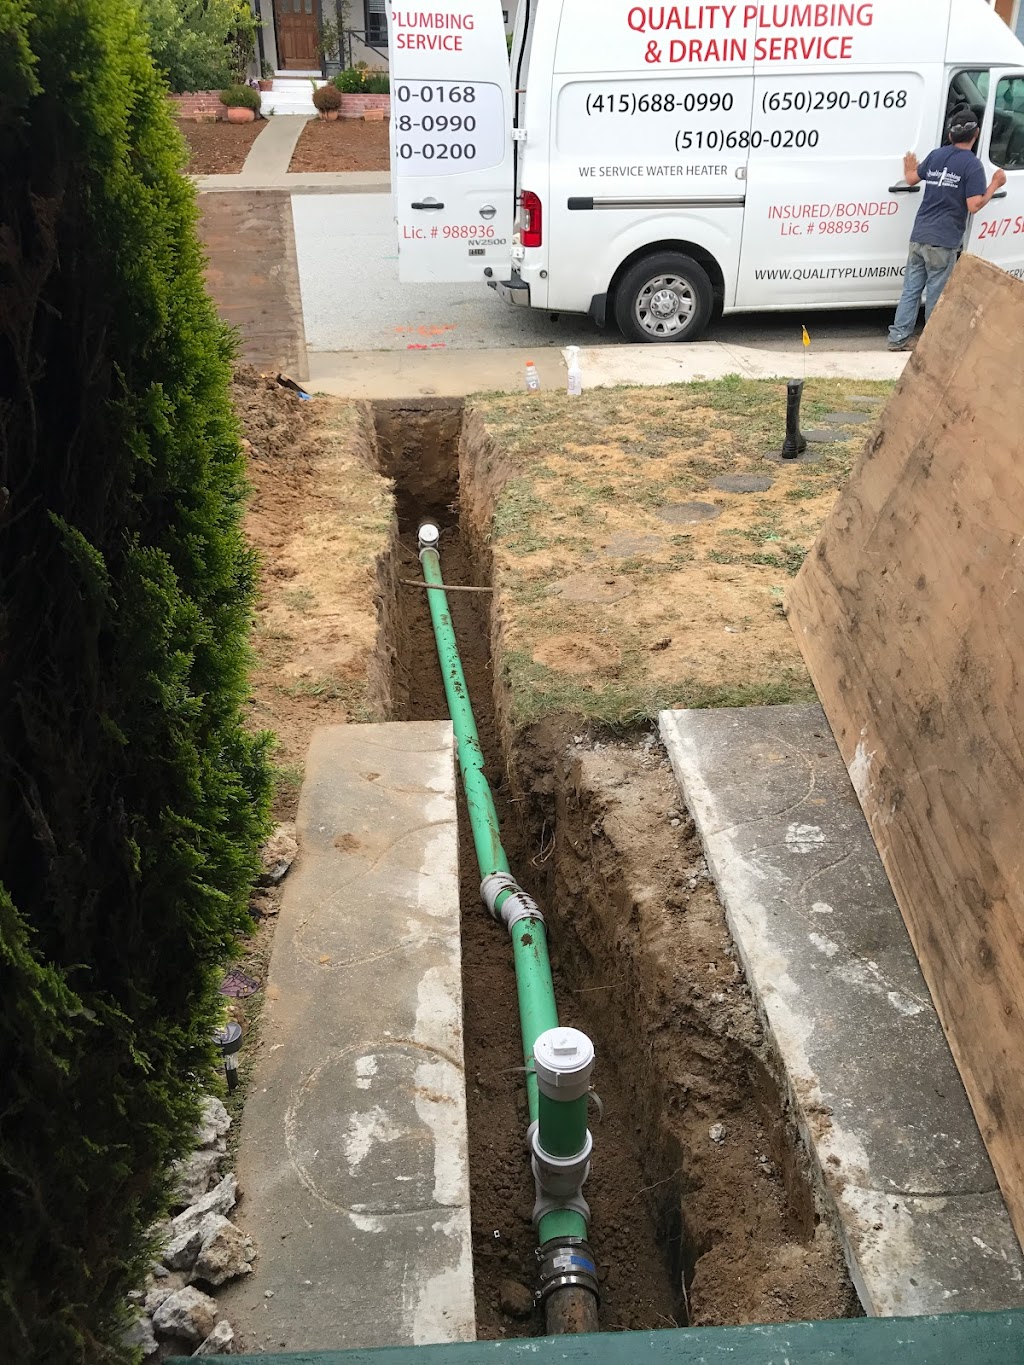 Quality Plumbing & Drain Service | 80 Morningside Dr, Daly City, CA 94015 | Phone: (415) 466-8440